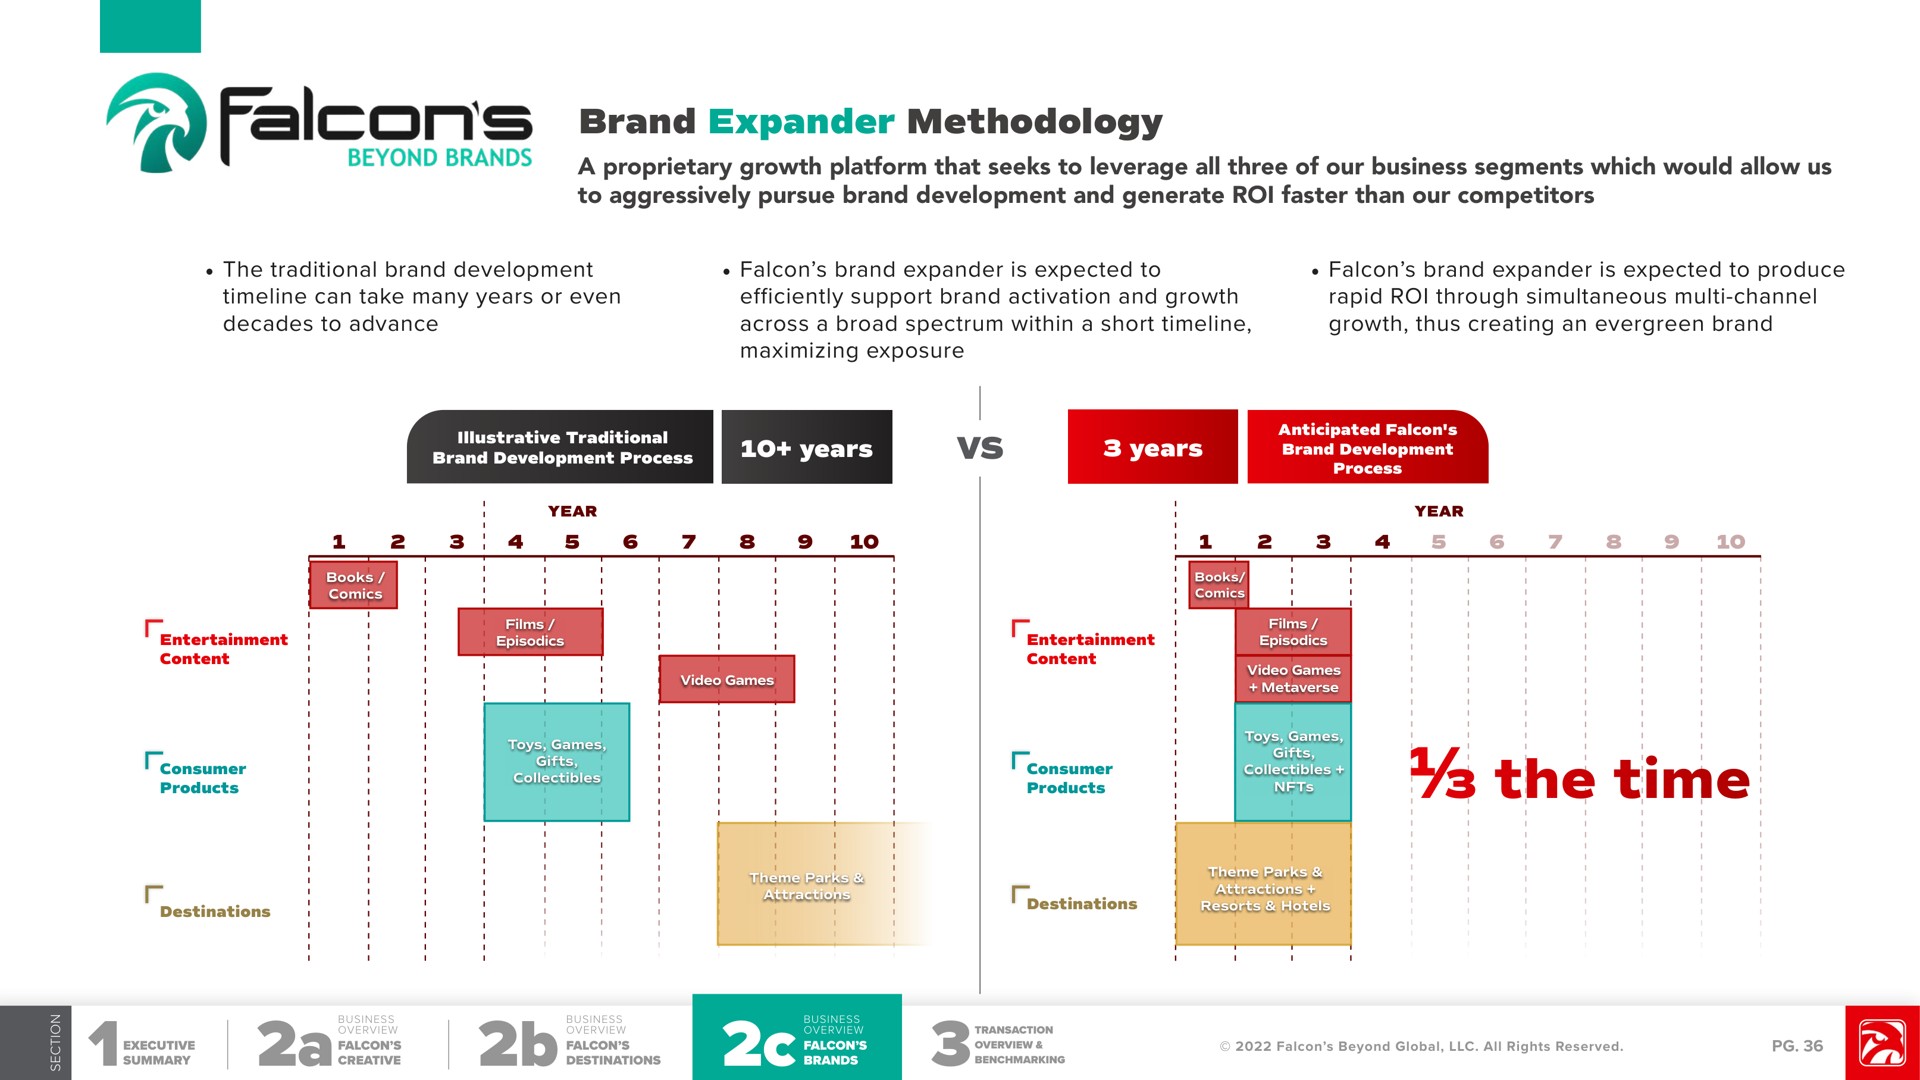 brand expander methodology a proprietary growth platform that seeks to leverage all three of our business segments which would allow us to aggressively pursue brand development and generate roi faster than our competitors the traditional brand development can take many years or even decades to advance falcon brand expander is expected to efficiently support brand activation and growth across a broad spectrum within a short maximizing exposure falcon brand expander is expected to produce rapid roi through simultaneous channel growth thus creating an evergreen brand years years the time falcons | Falcon's Beyond